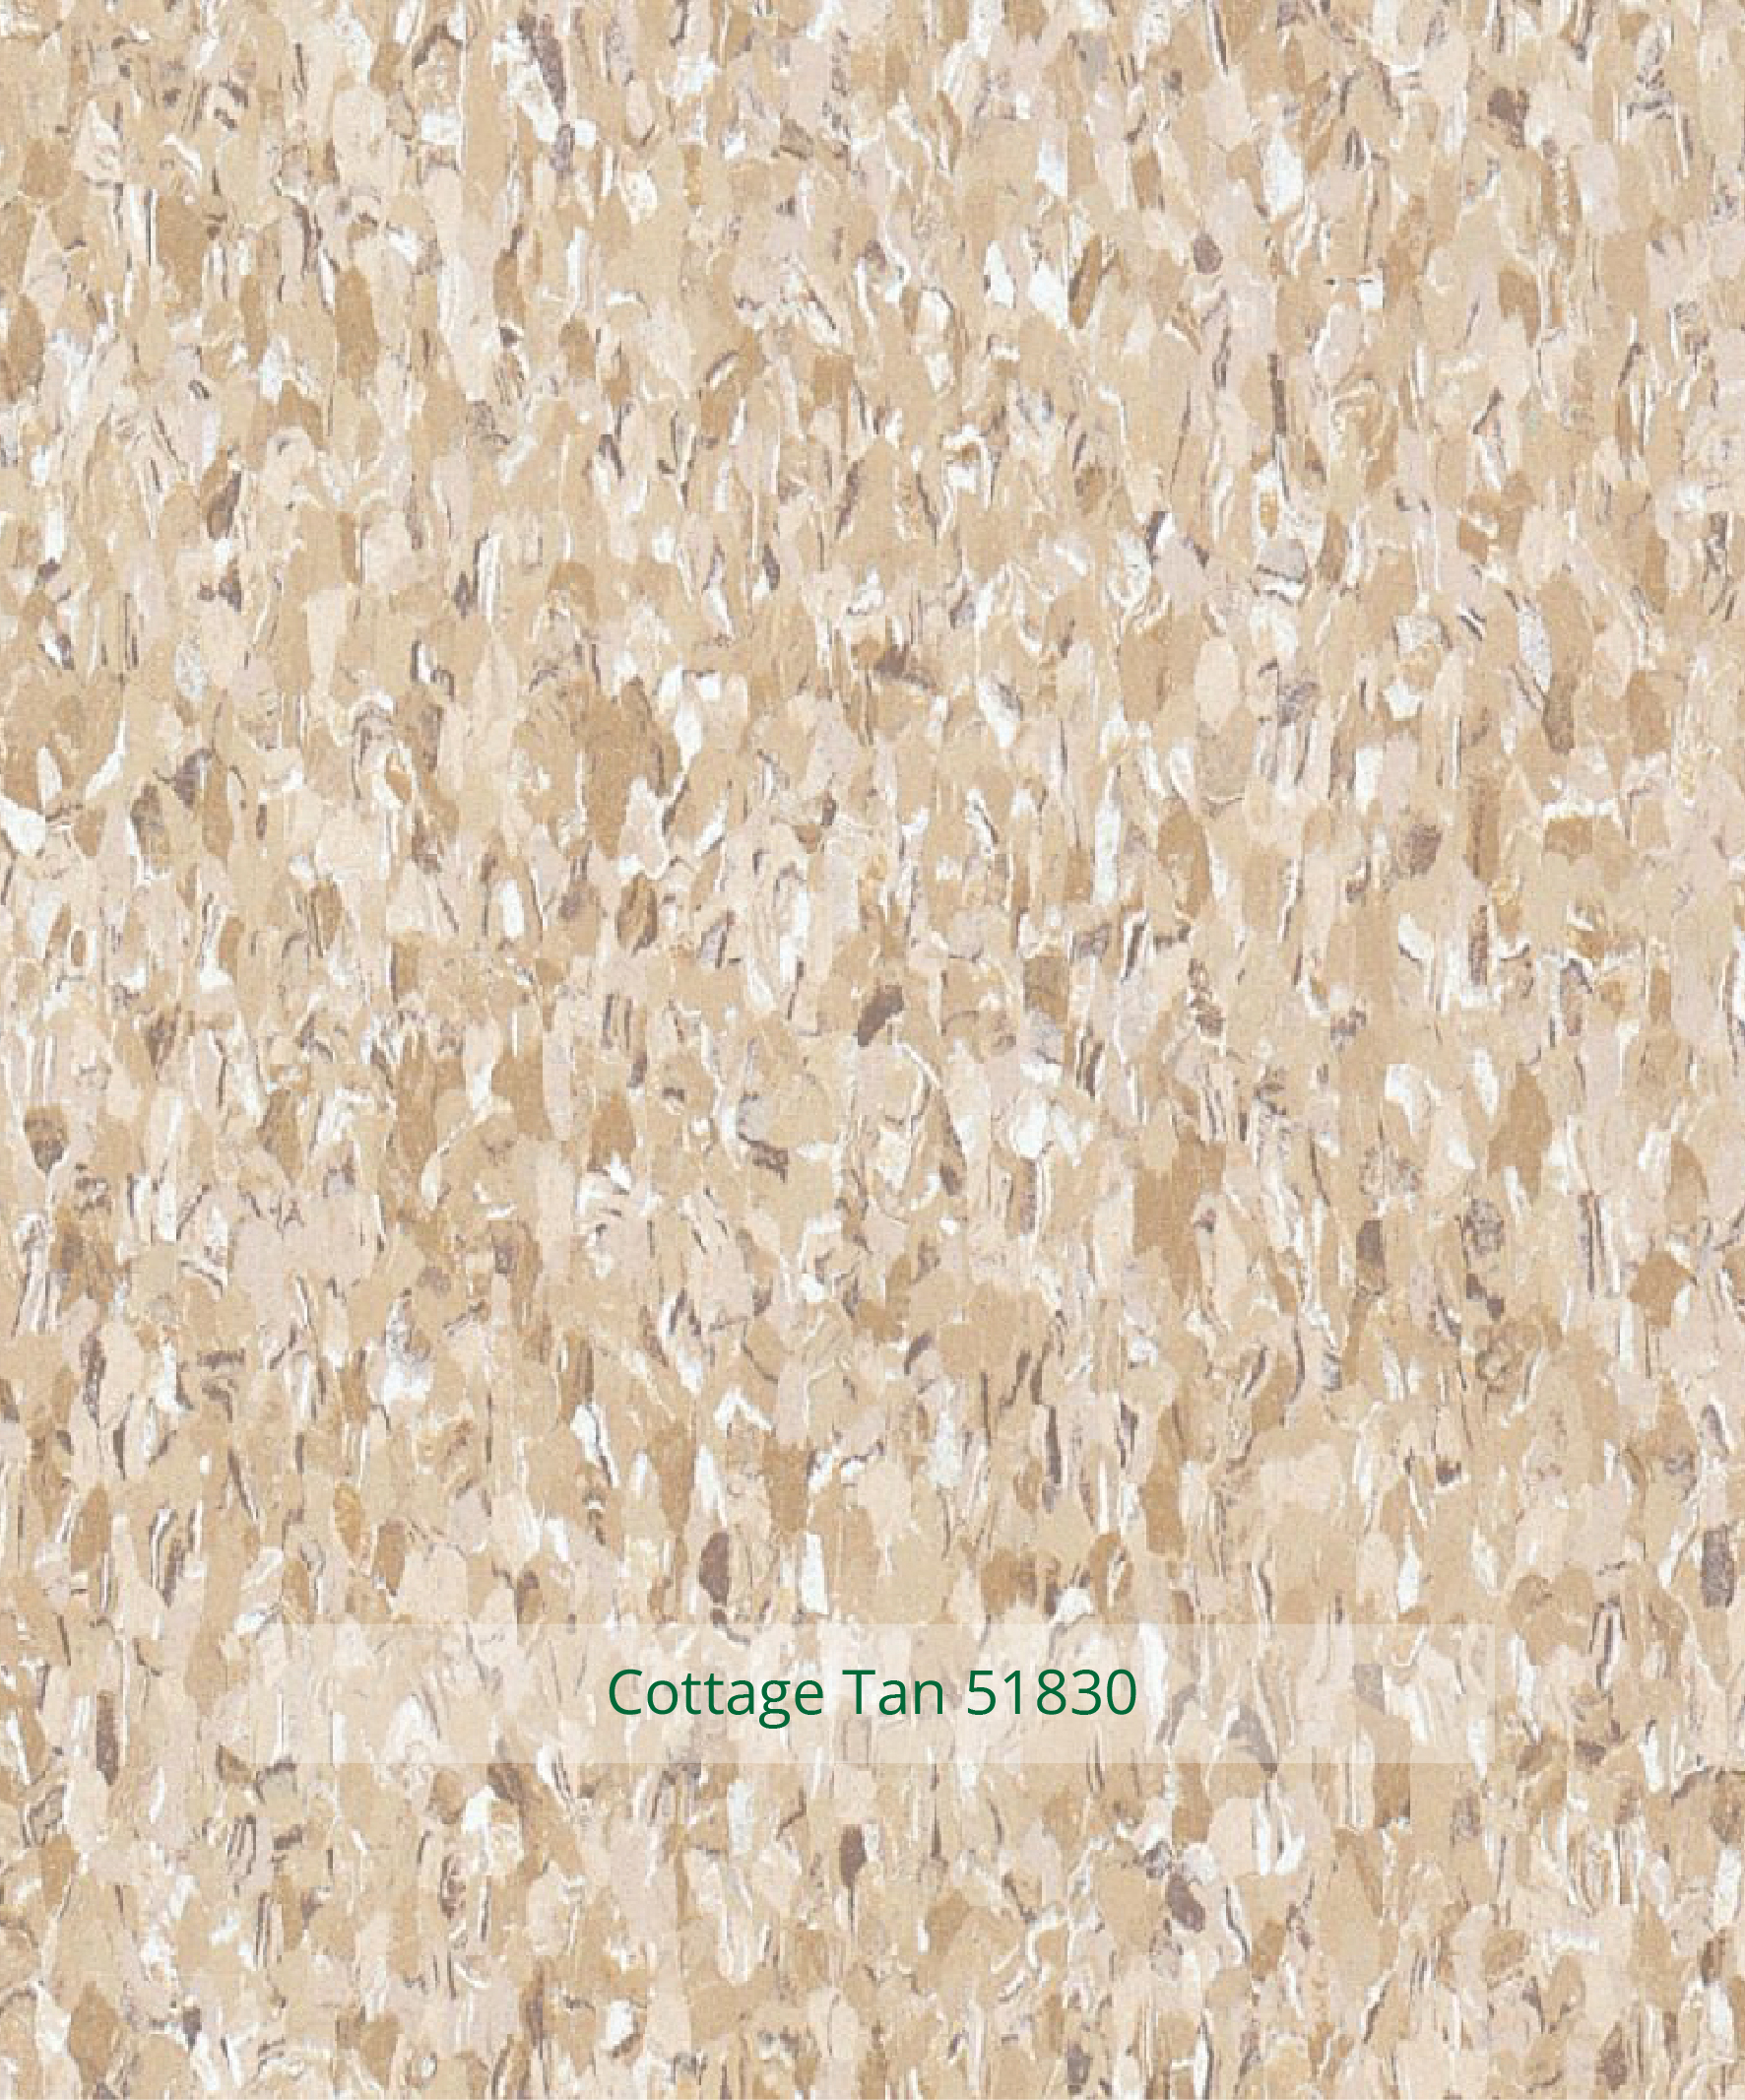 Standard EXCELON Imperial Series Cottage Tan 51830a